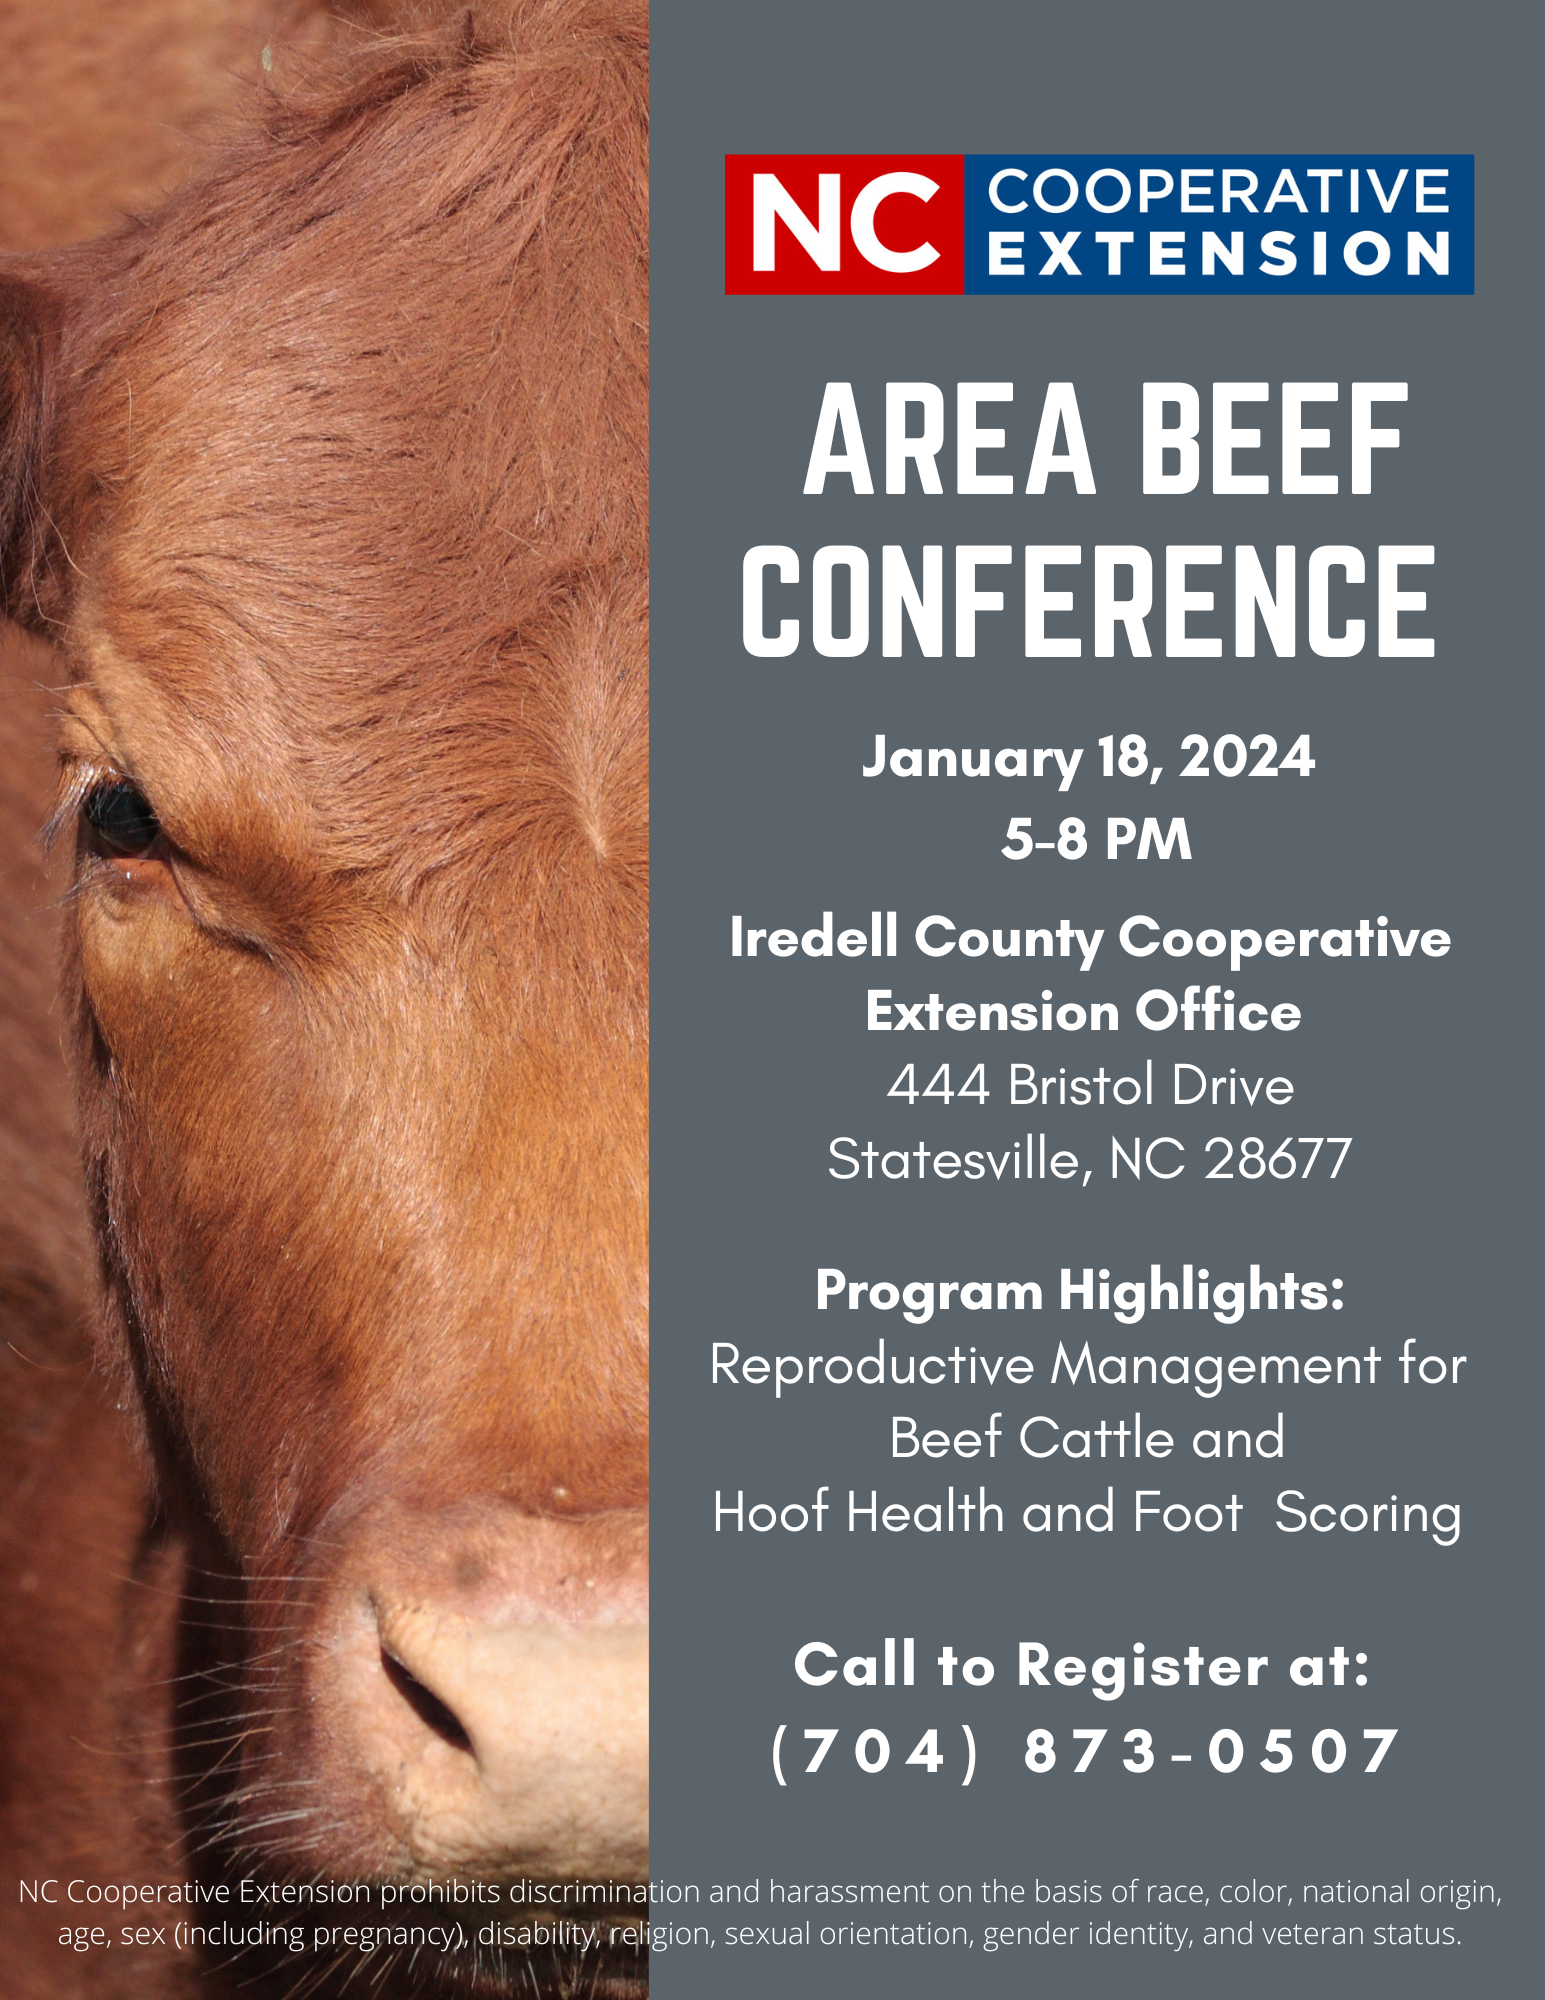 AREA BEEF CONFERENCE